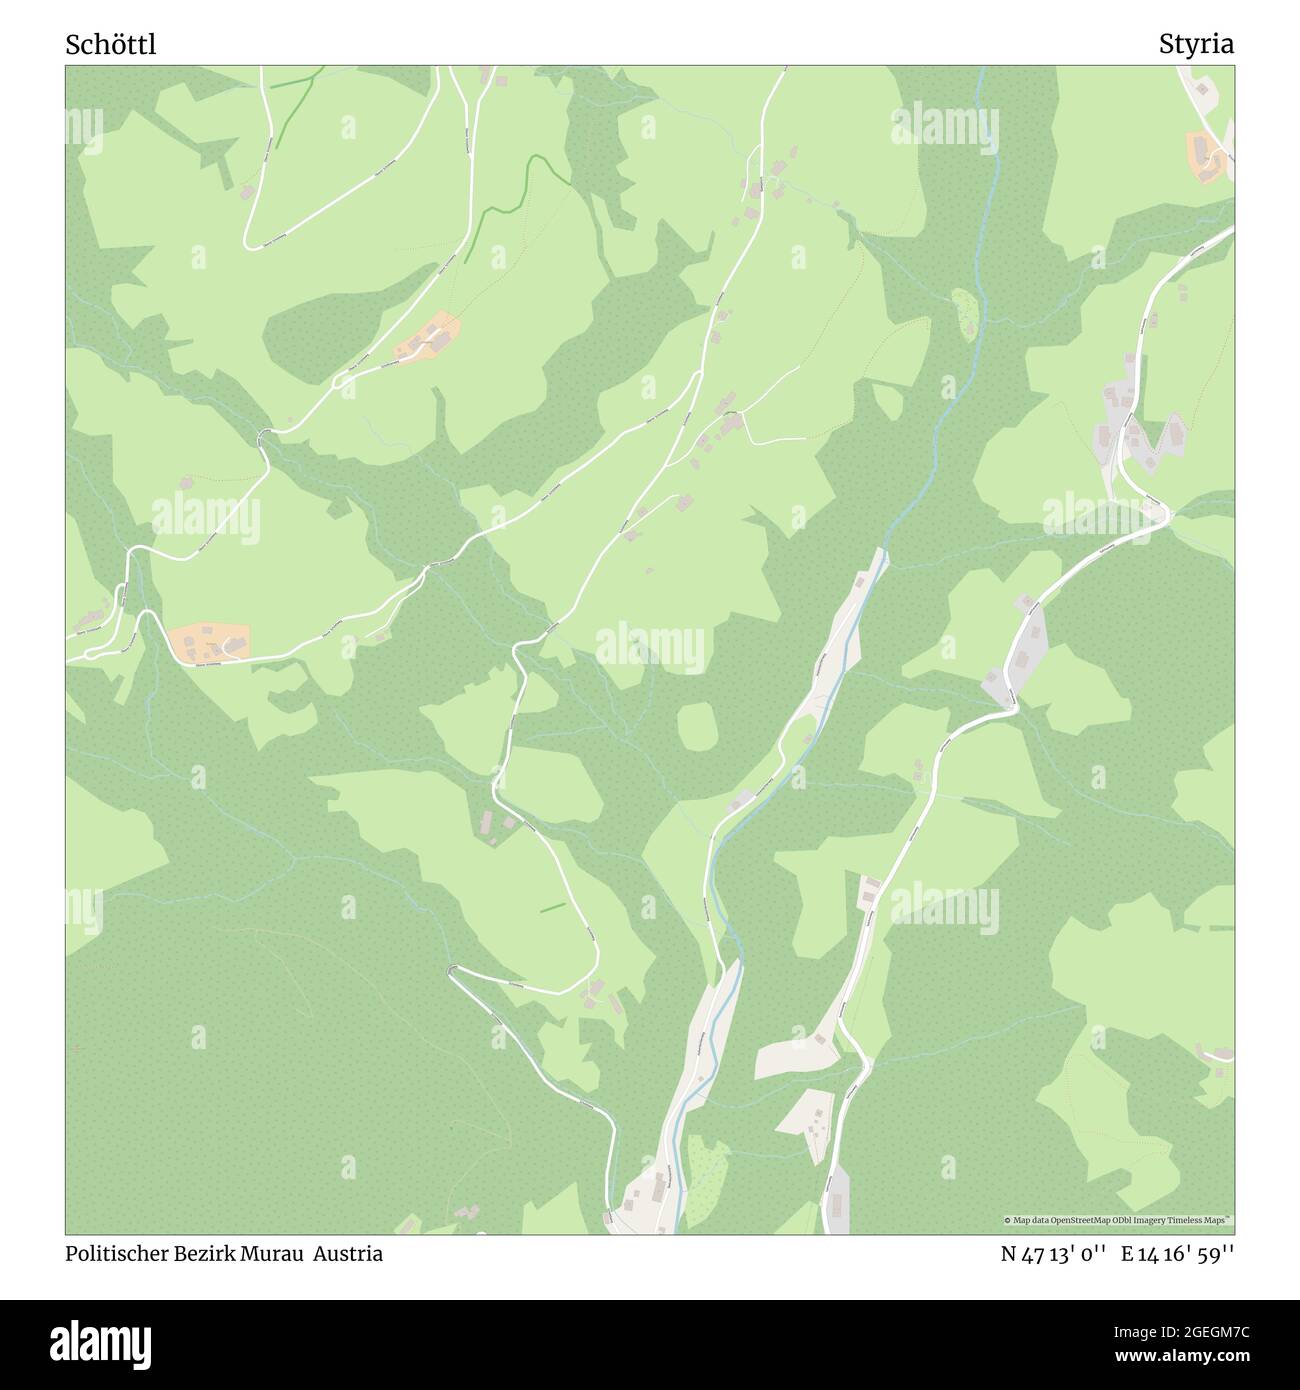 Schöttl, Politischer Bezirk Murau, Austria, Styria, N 47 13' 0'', E 14 16' 59'', map, Timeless Map published in 2021. Travelers, explorers and adventurers like Florence Nightingale, David Livingstone, Ernest Shackleton, Lewis and Clark and Sherlock Holmes relied on maps to plan travels to the world's most remote corners, Timeless Maps is mapping most locations on the globe, showing the achievement of great dreams Stock Photo